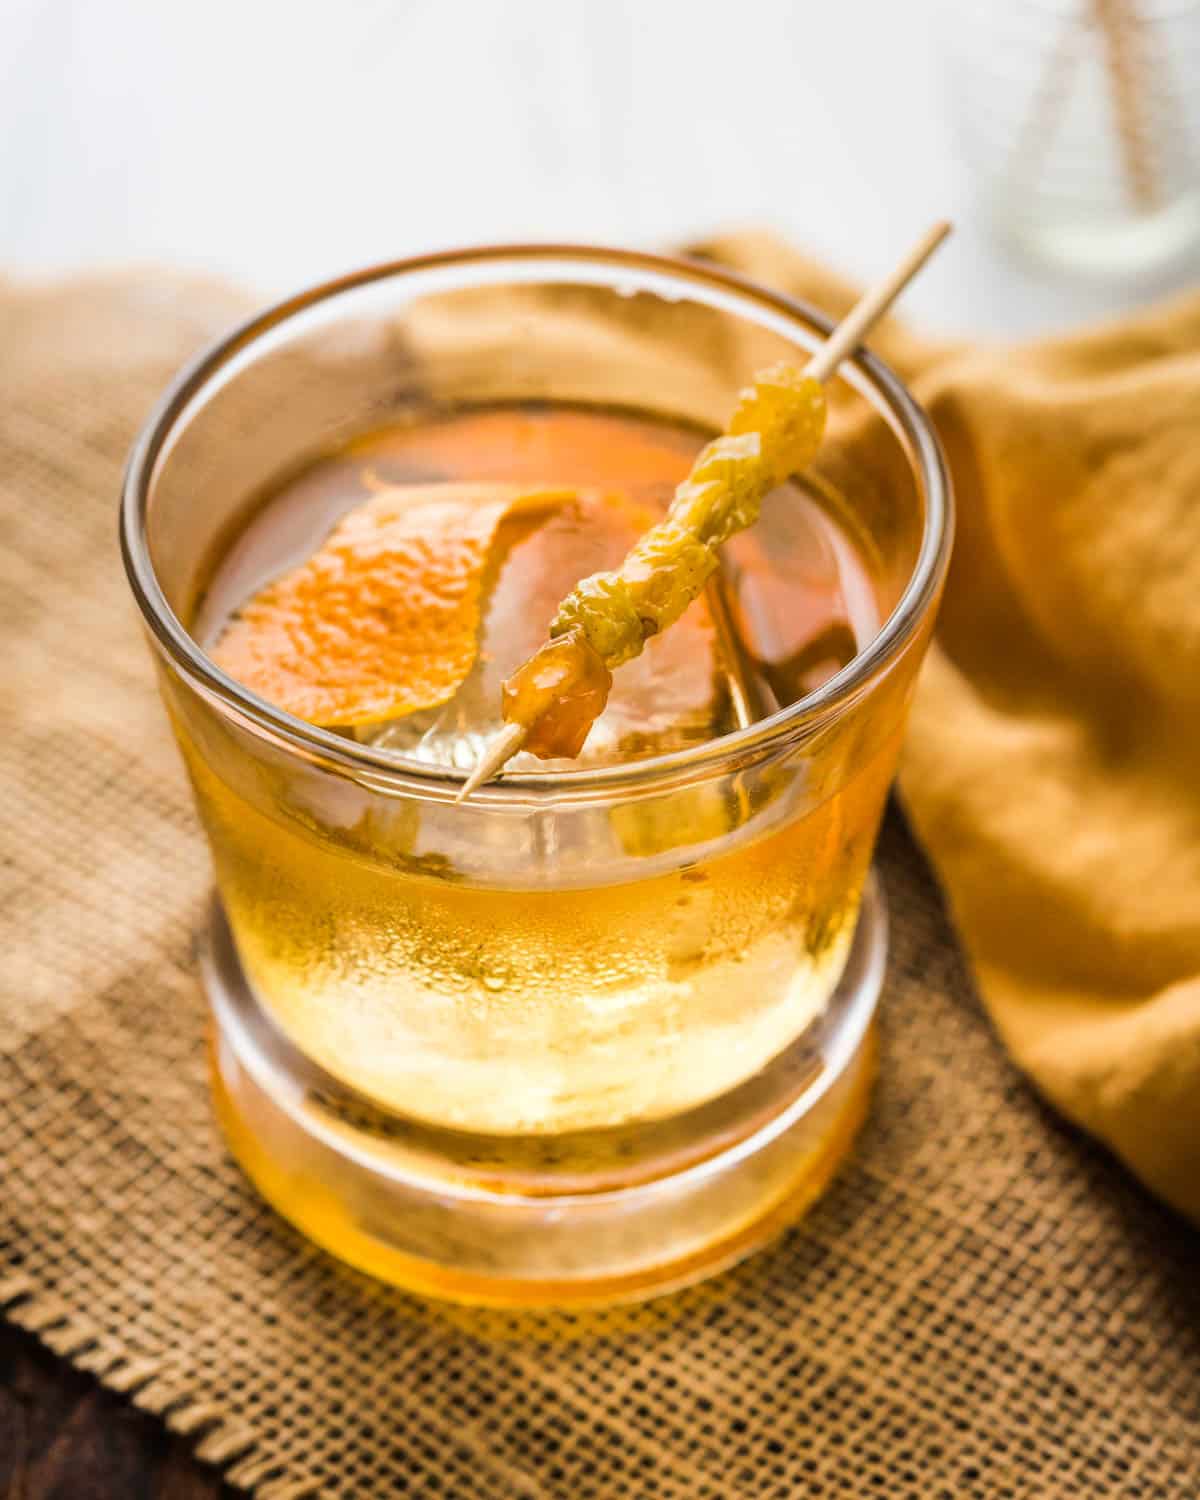 the old fashioned being served with orange peel garnish.